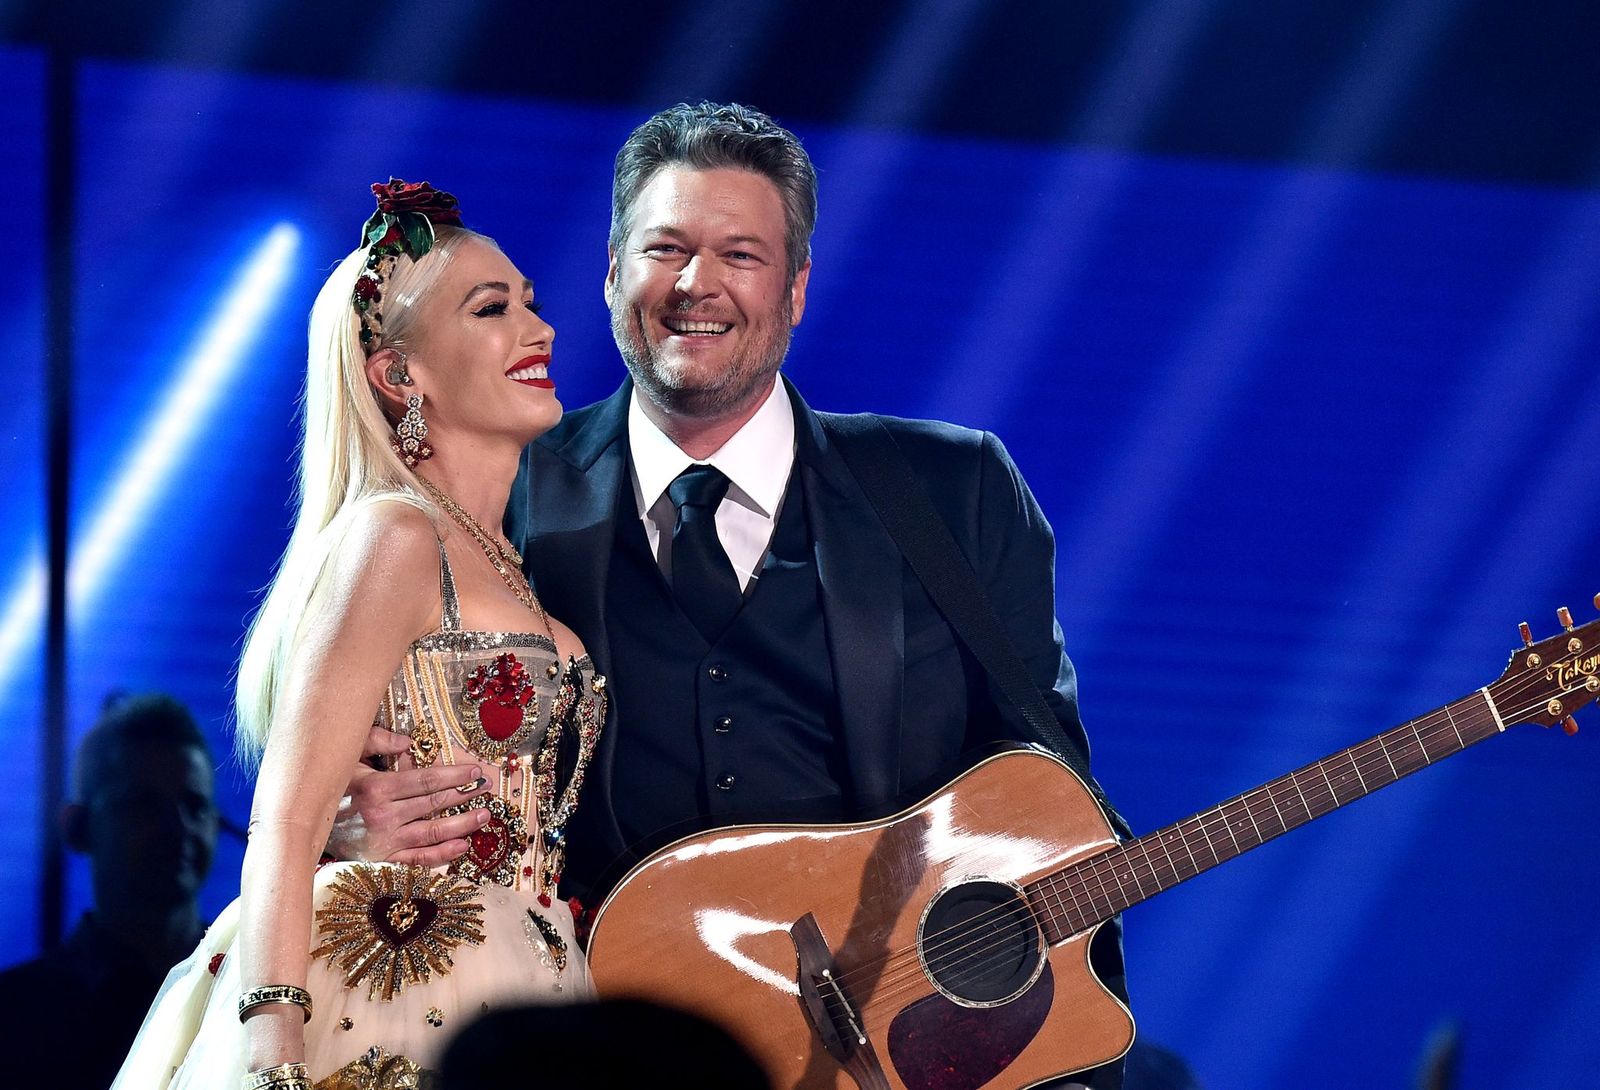 Gwen Stefani and Blake Shelton at the 62nd Annual GRAMMY Awards on January 26, 2020 in Los Angeles, California | Photo: Getty Images